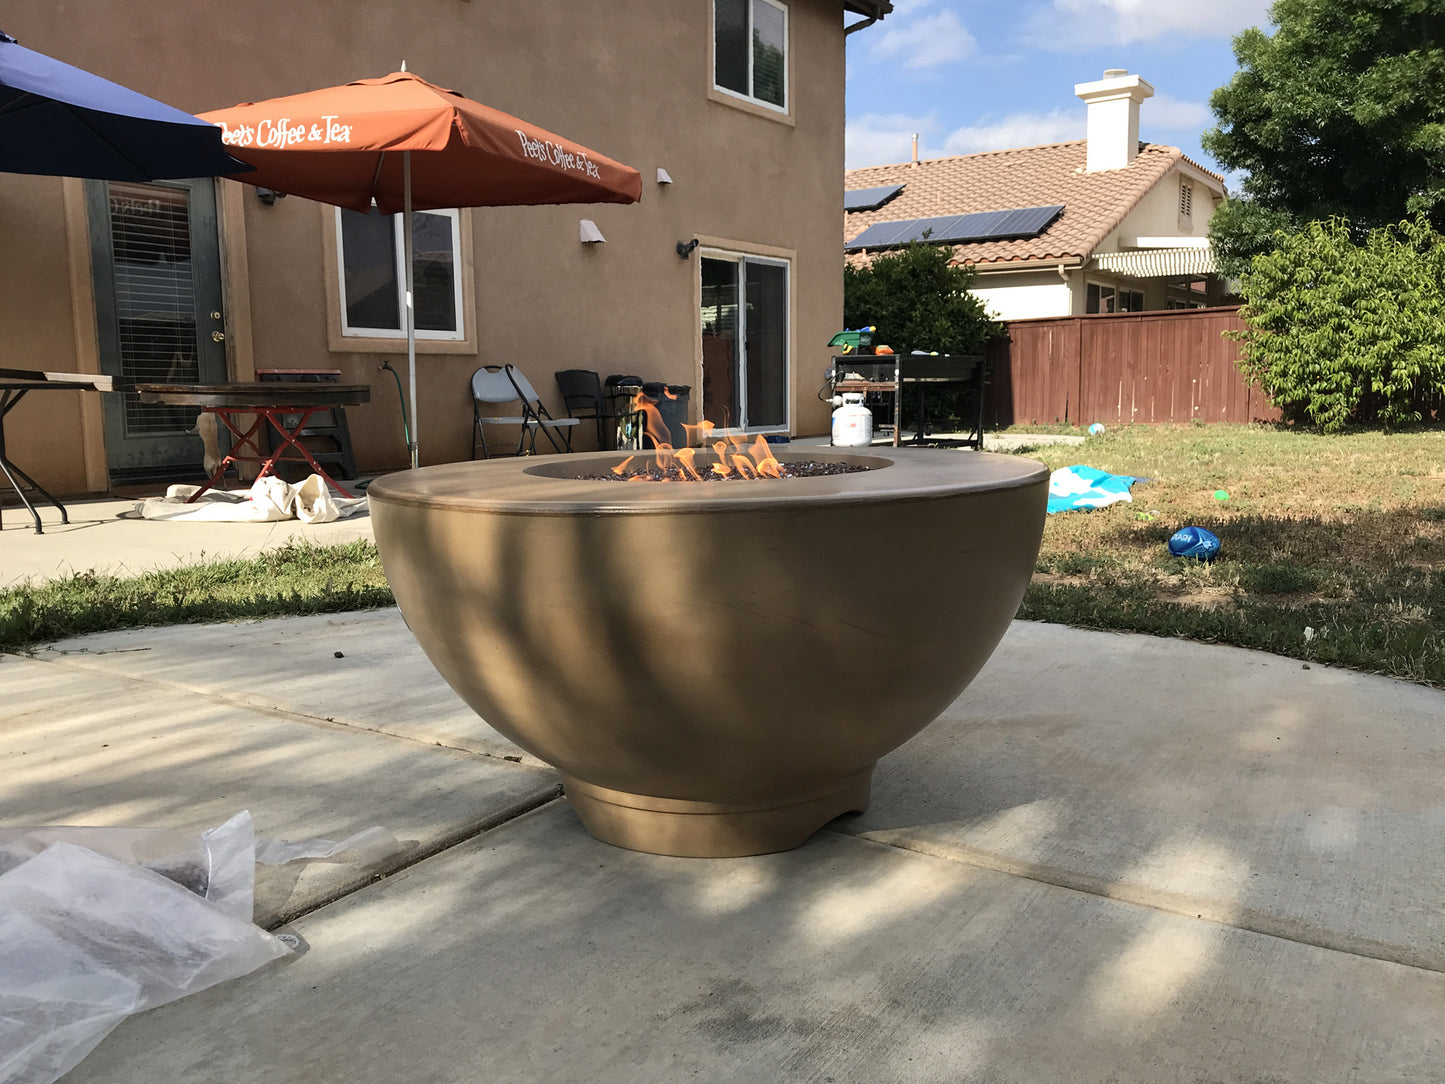 The Outdoor Plus Sienna Concrete Fire Pit - Free Cover